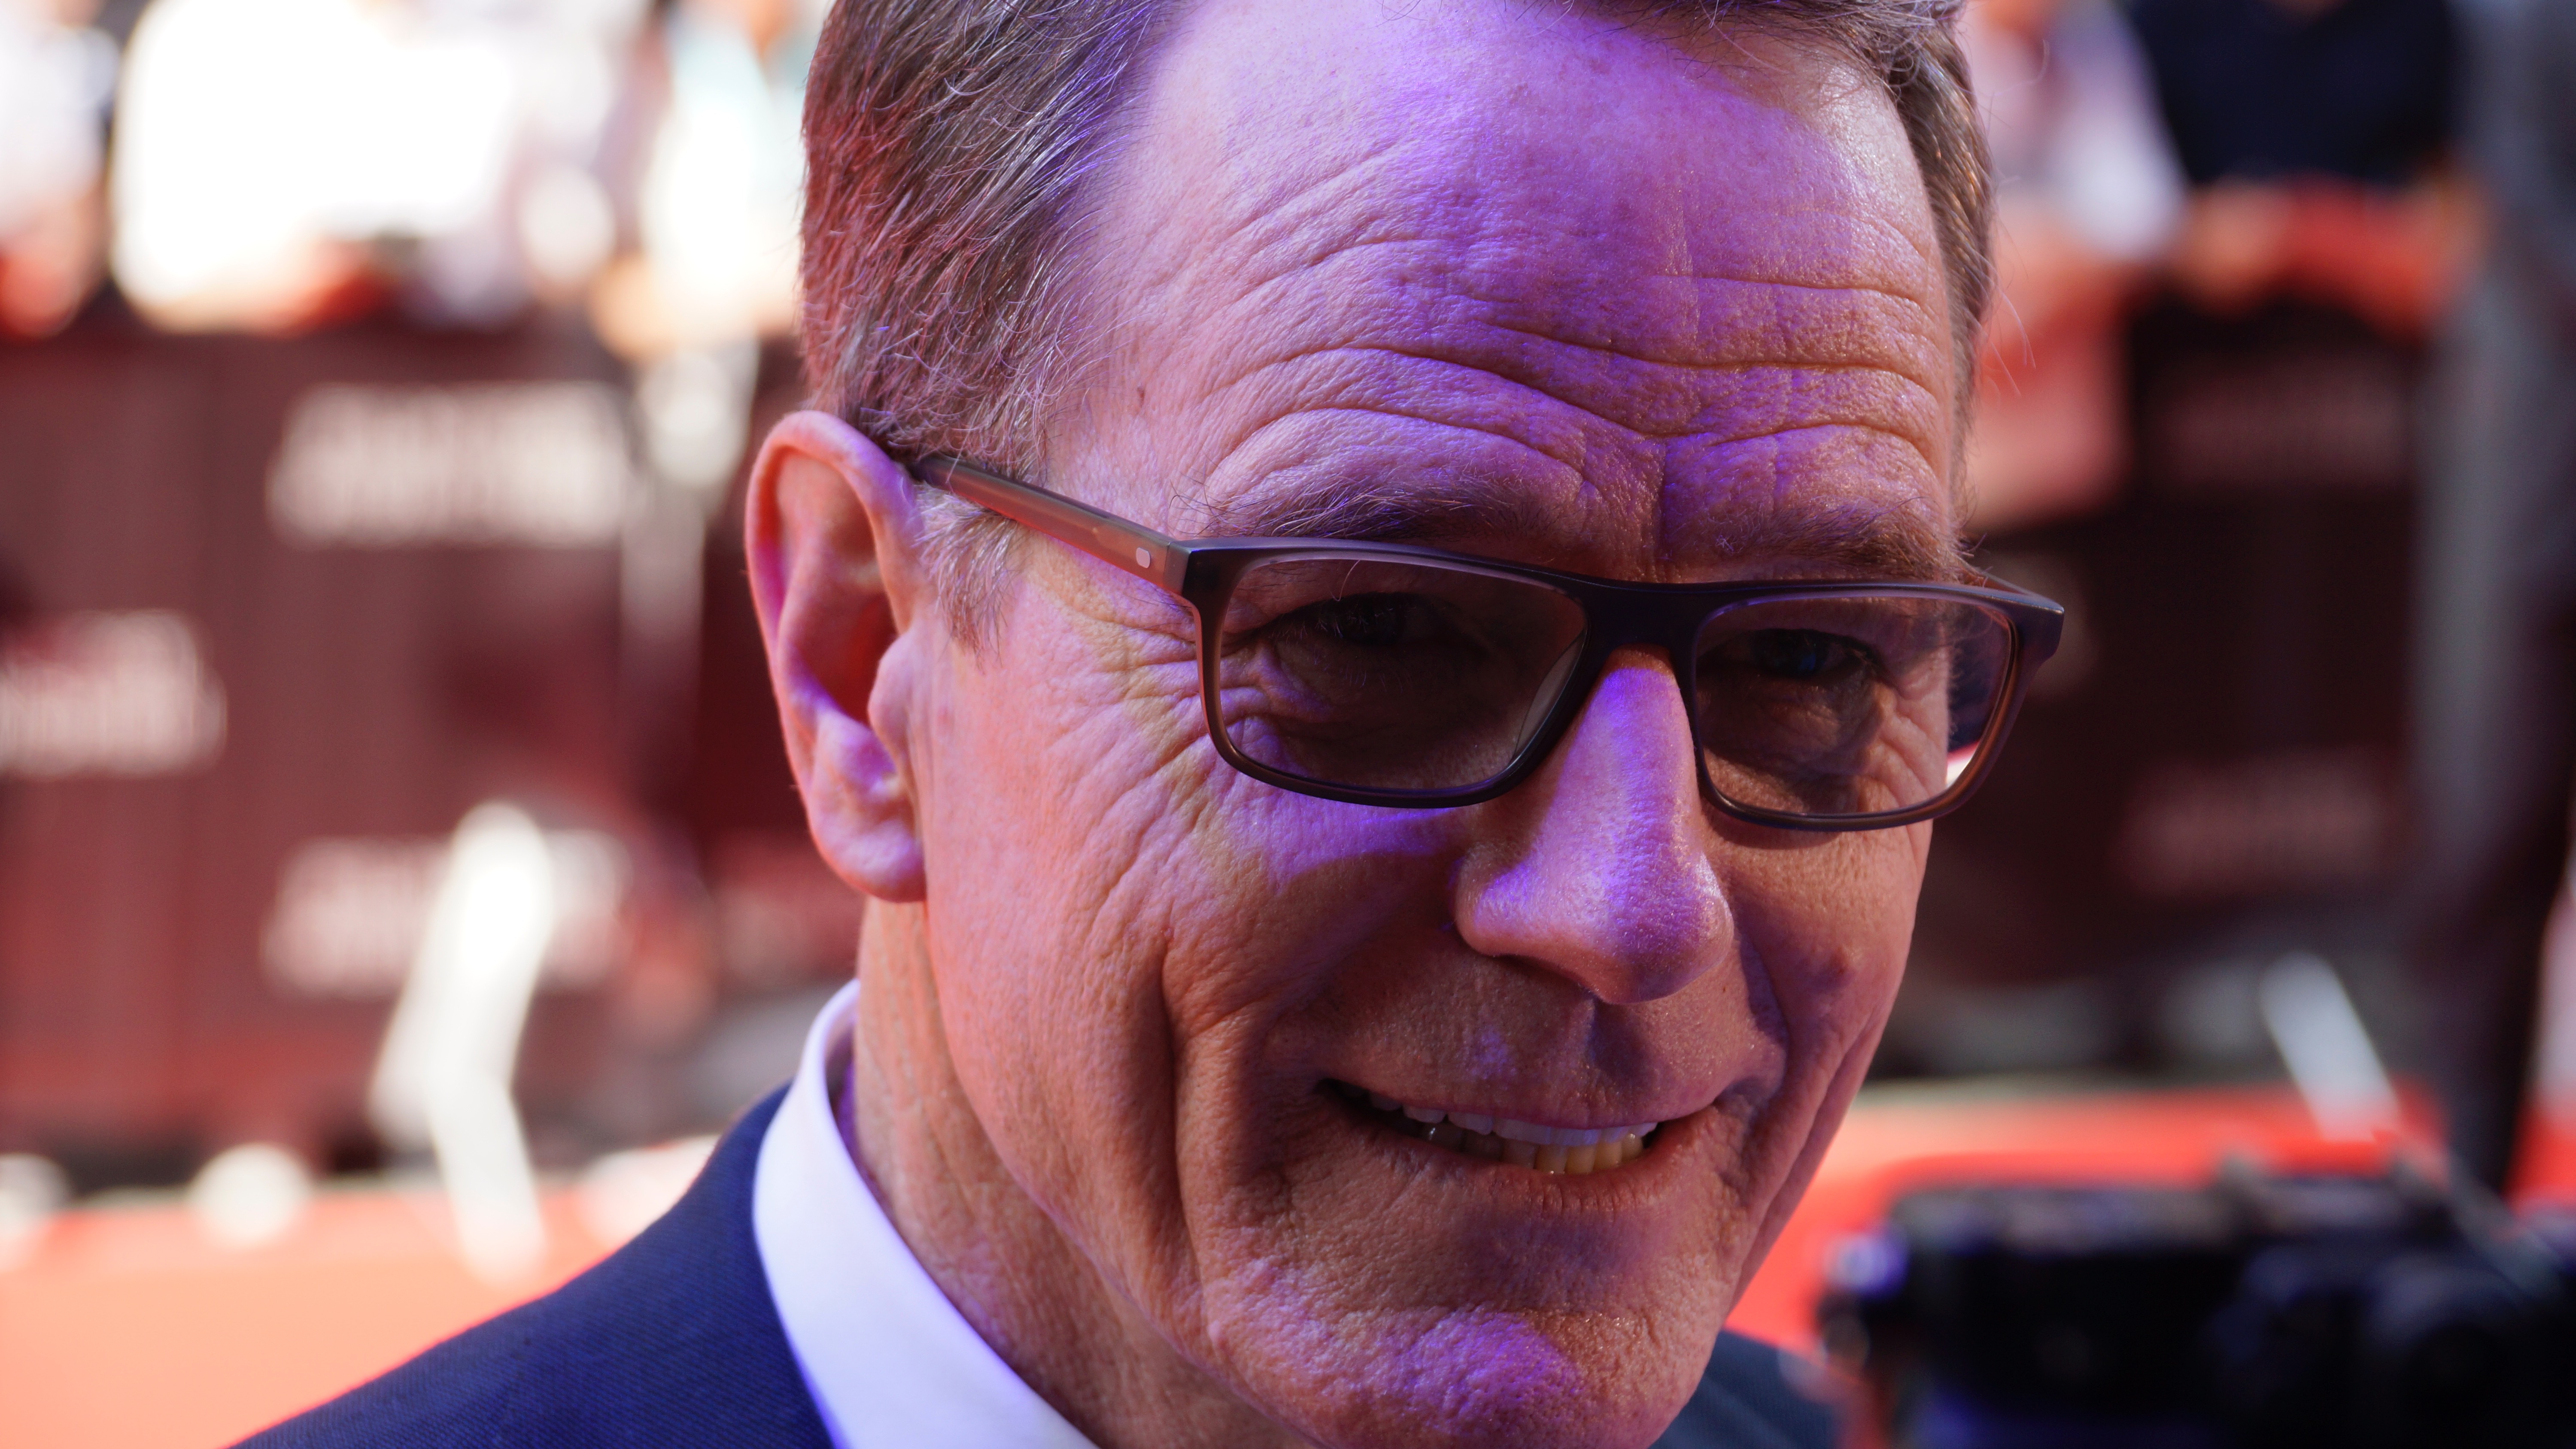 Breaking Bad Star Bryan Cranston at Filmfest Munich About Fame, Love and Walter White